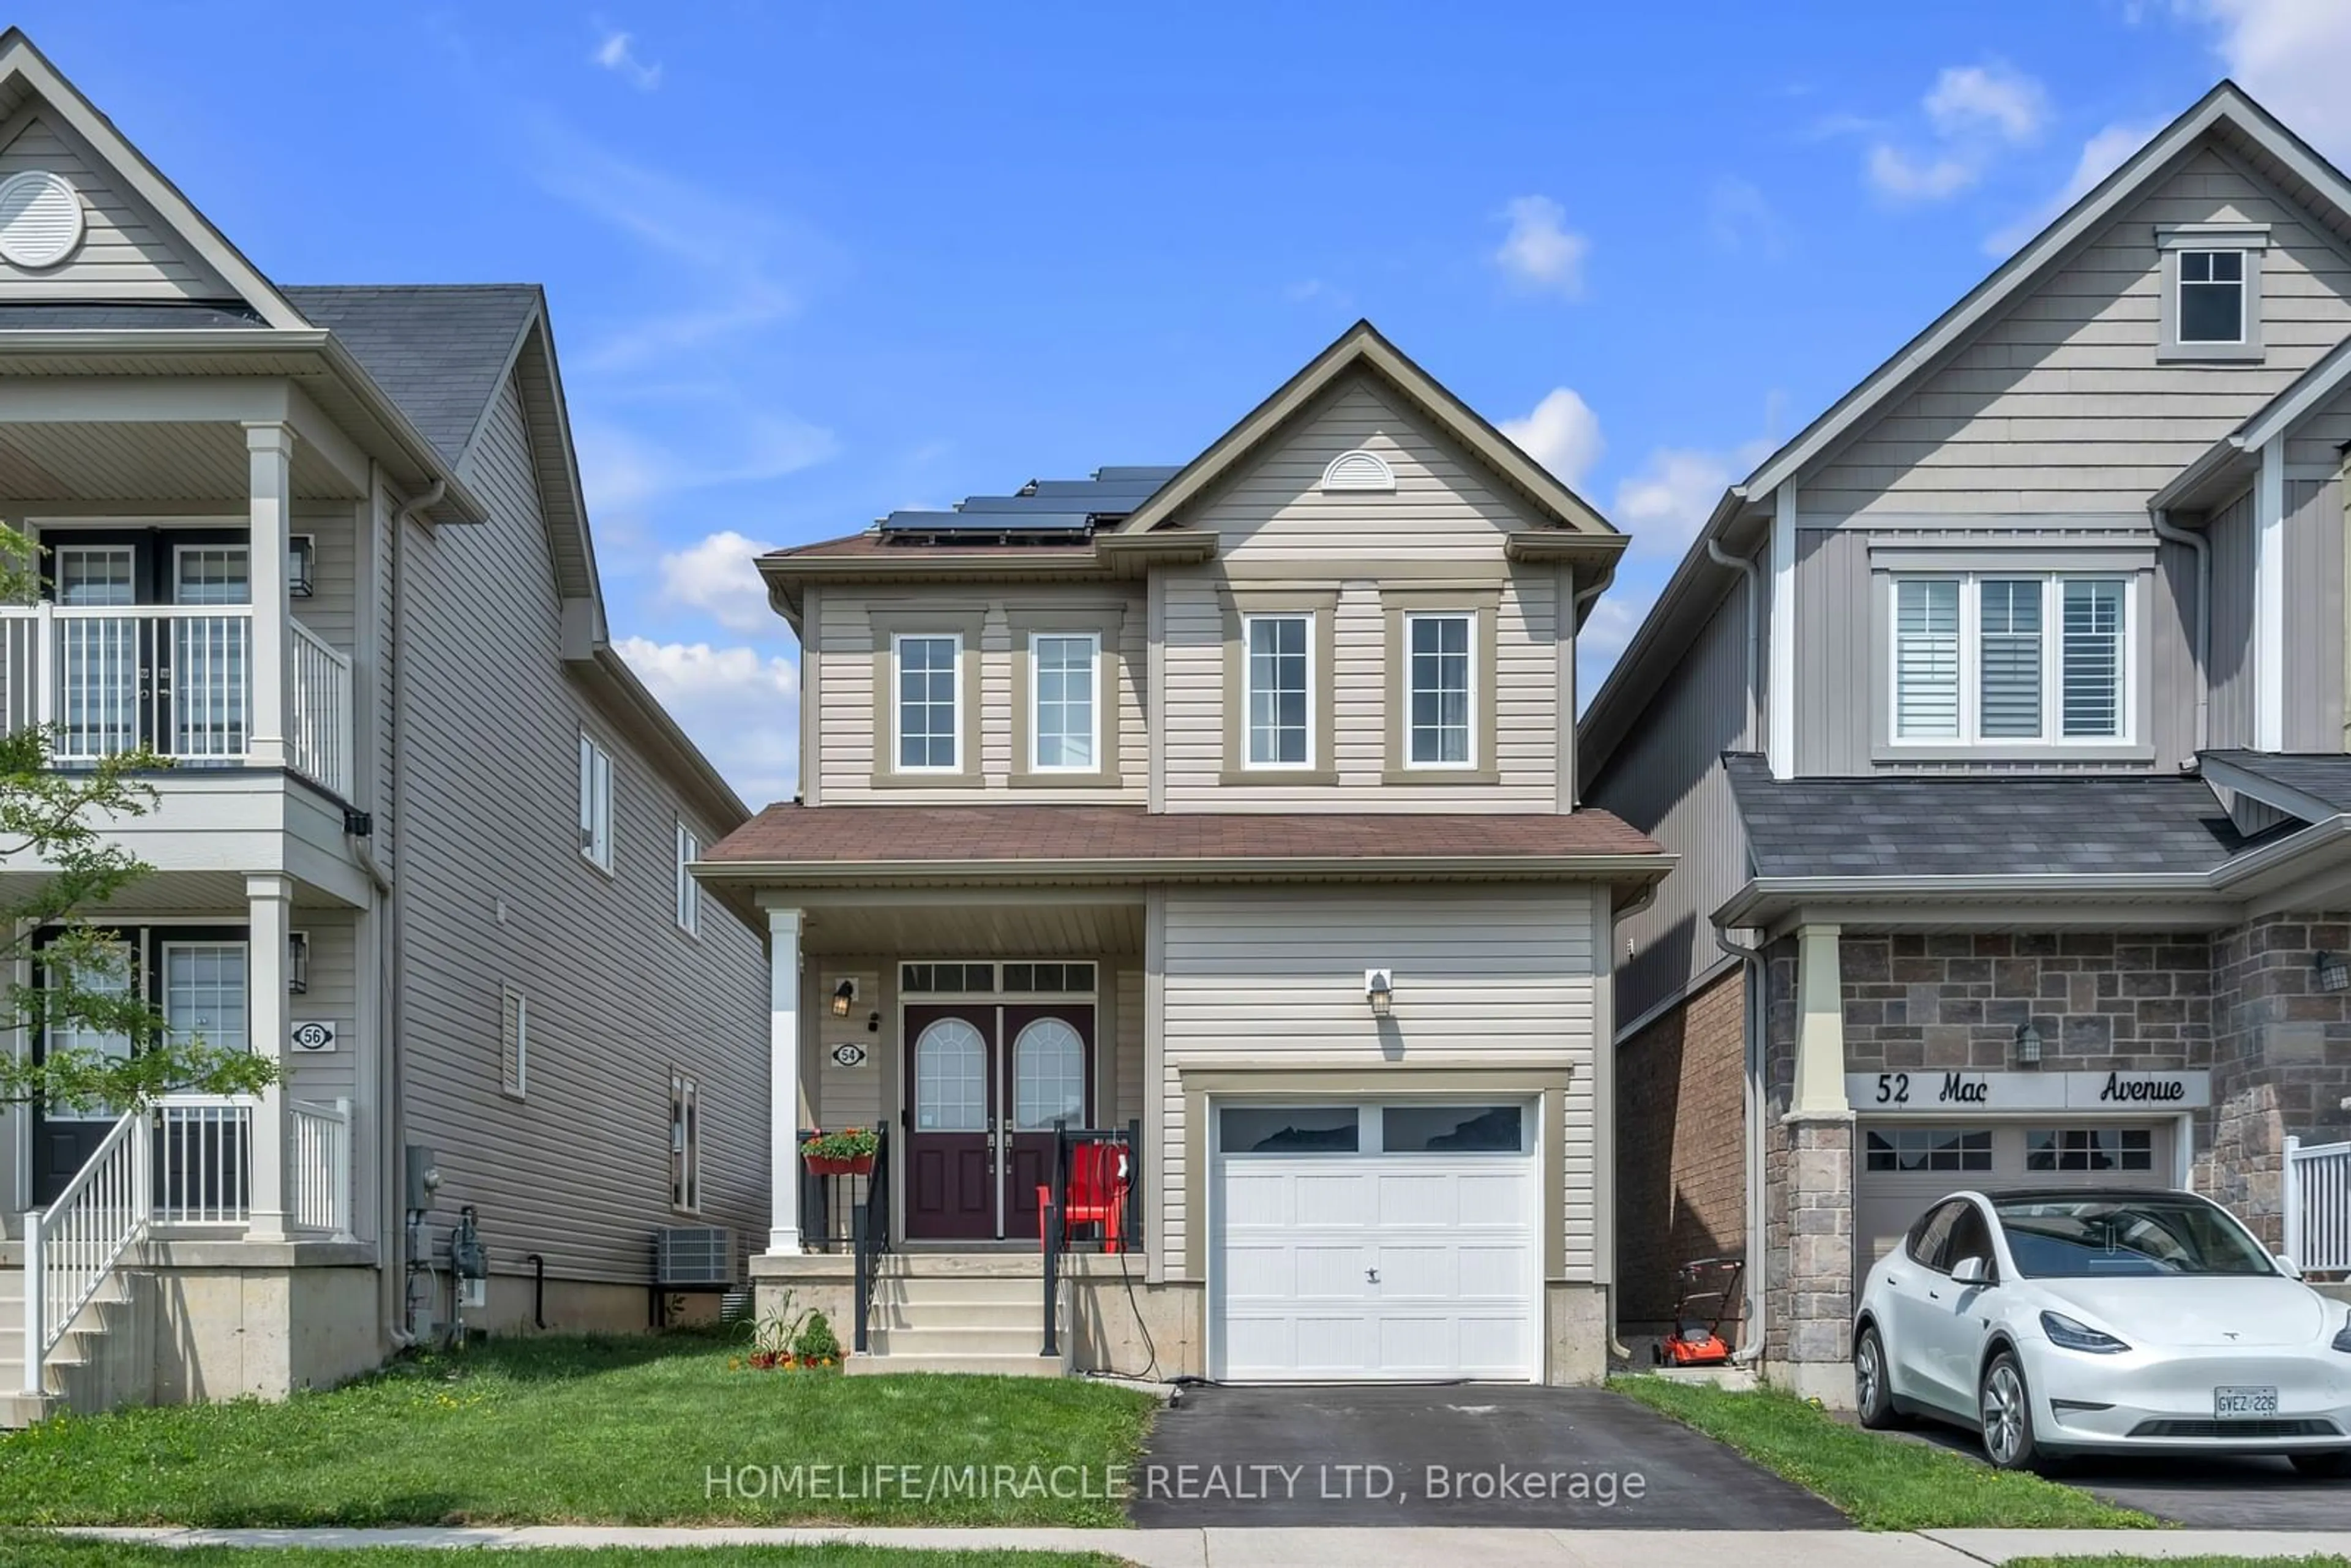 Frontside or backside of a home for 54 Maclachlan Ave, Haldimand Ontario N3W 0C7